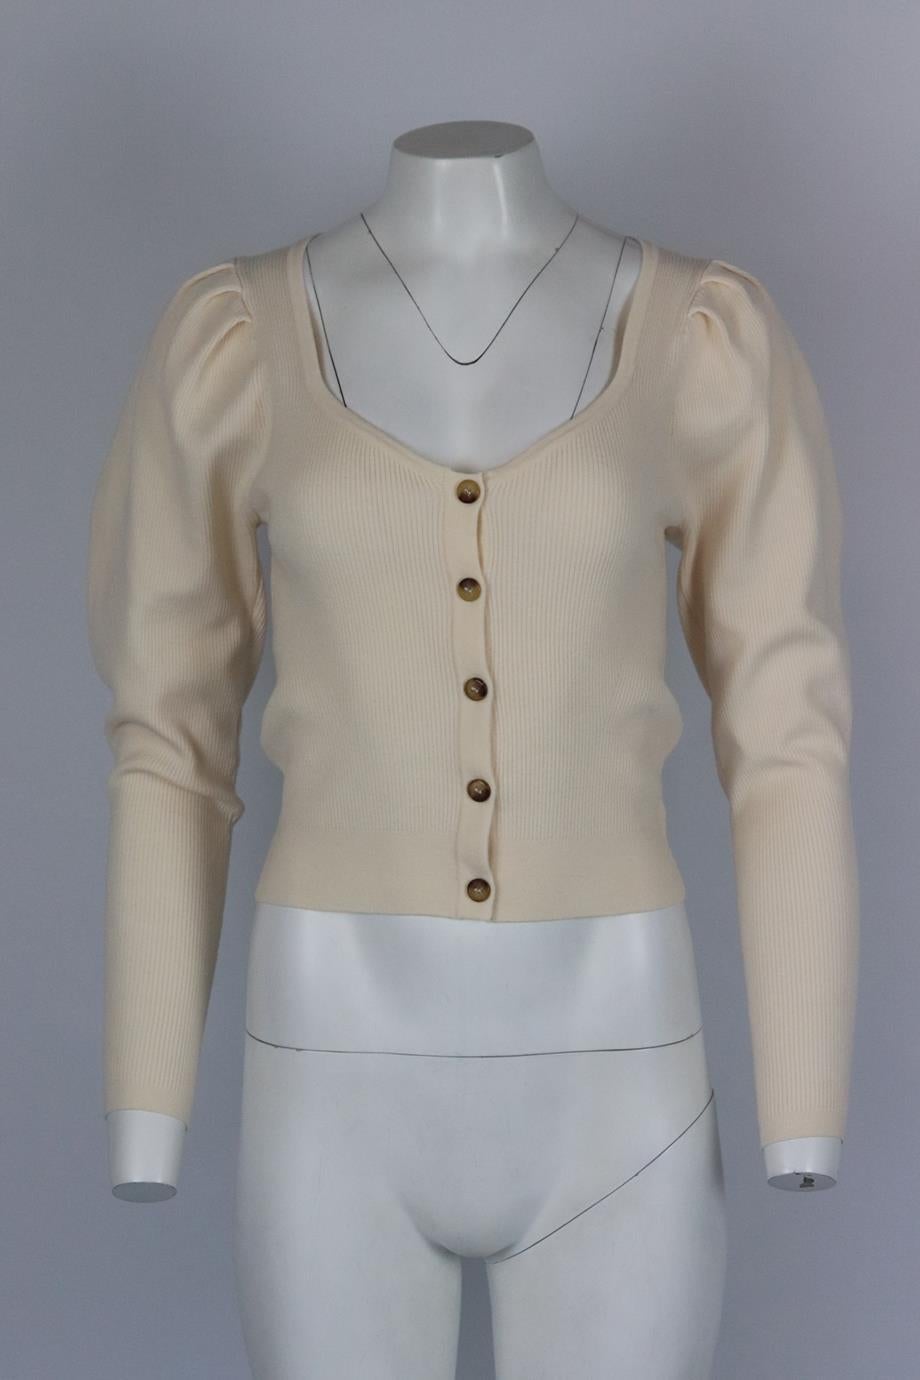 Ulla Johnson ribbed wool cardigan. Cream. Long sleeve, v-neck. Button fastening at front. 100% Wool. Size: Medium (UK 10, US 6, FR 38, IT 42). Bust: 30 in. Waist: 29 in. Hips: 28 in. Length: 18.75 in. New with tags
